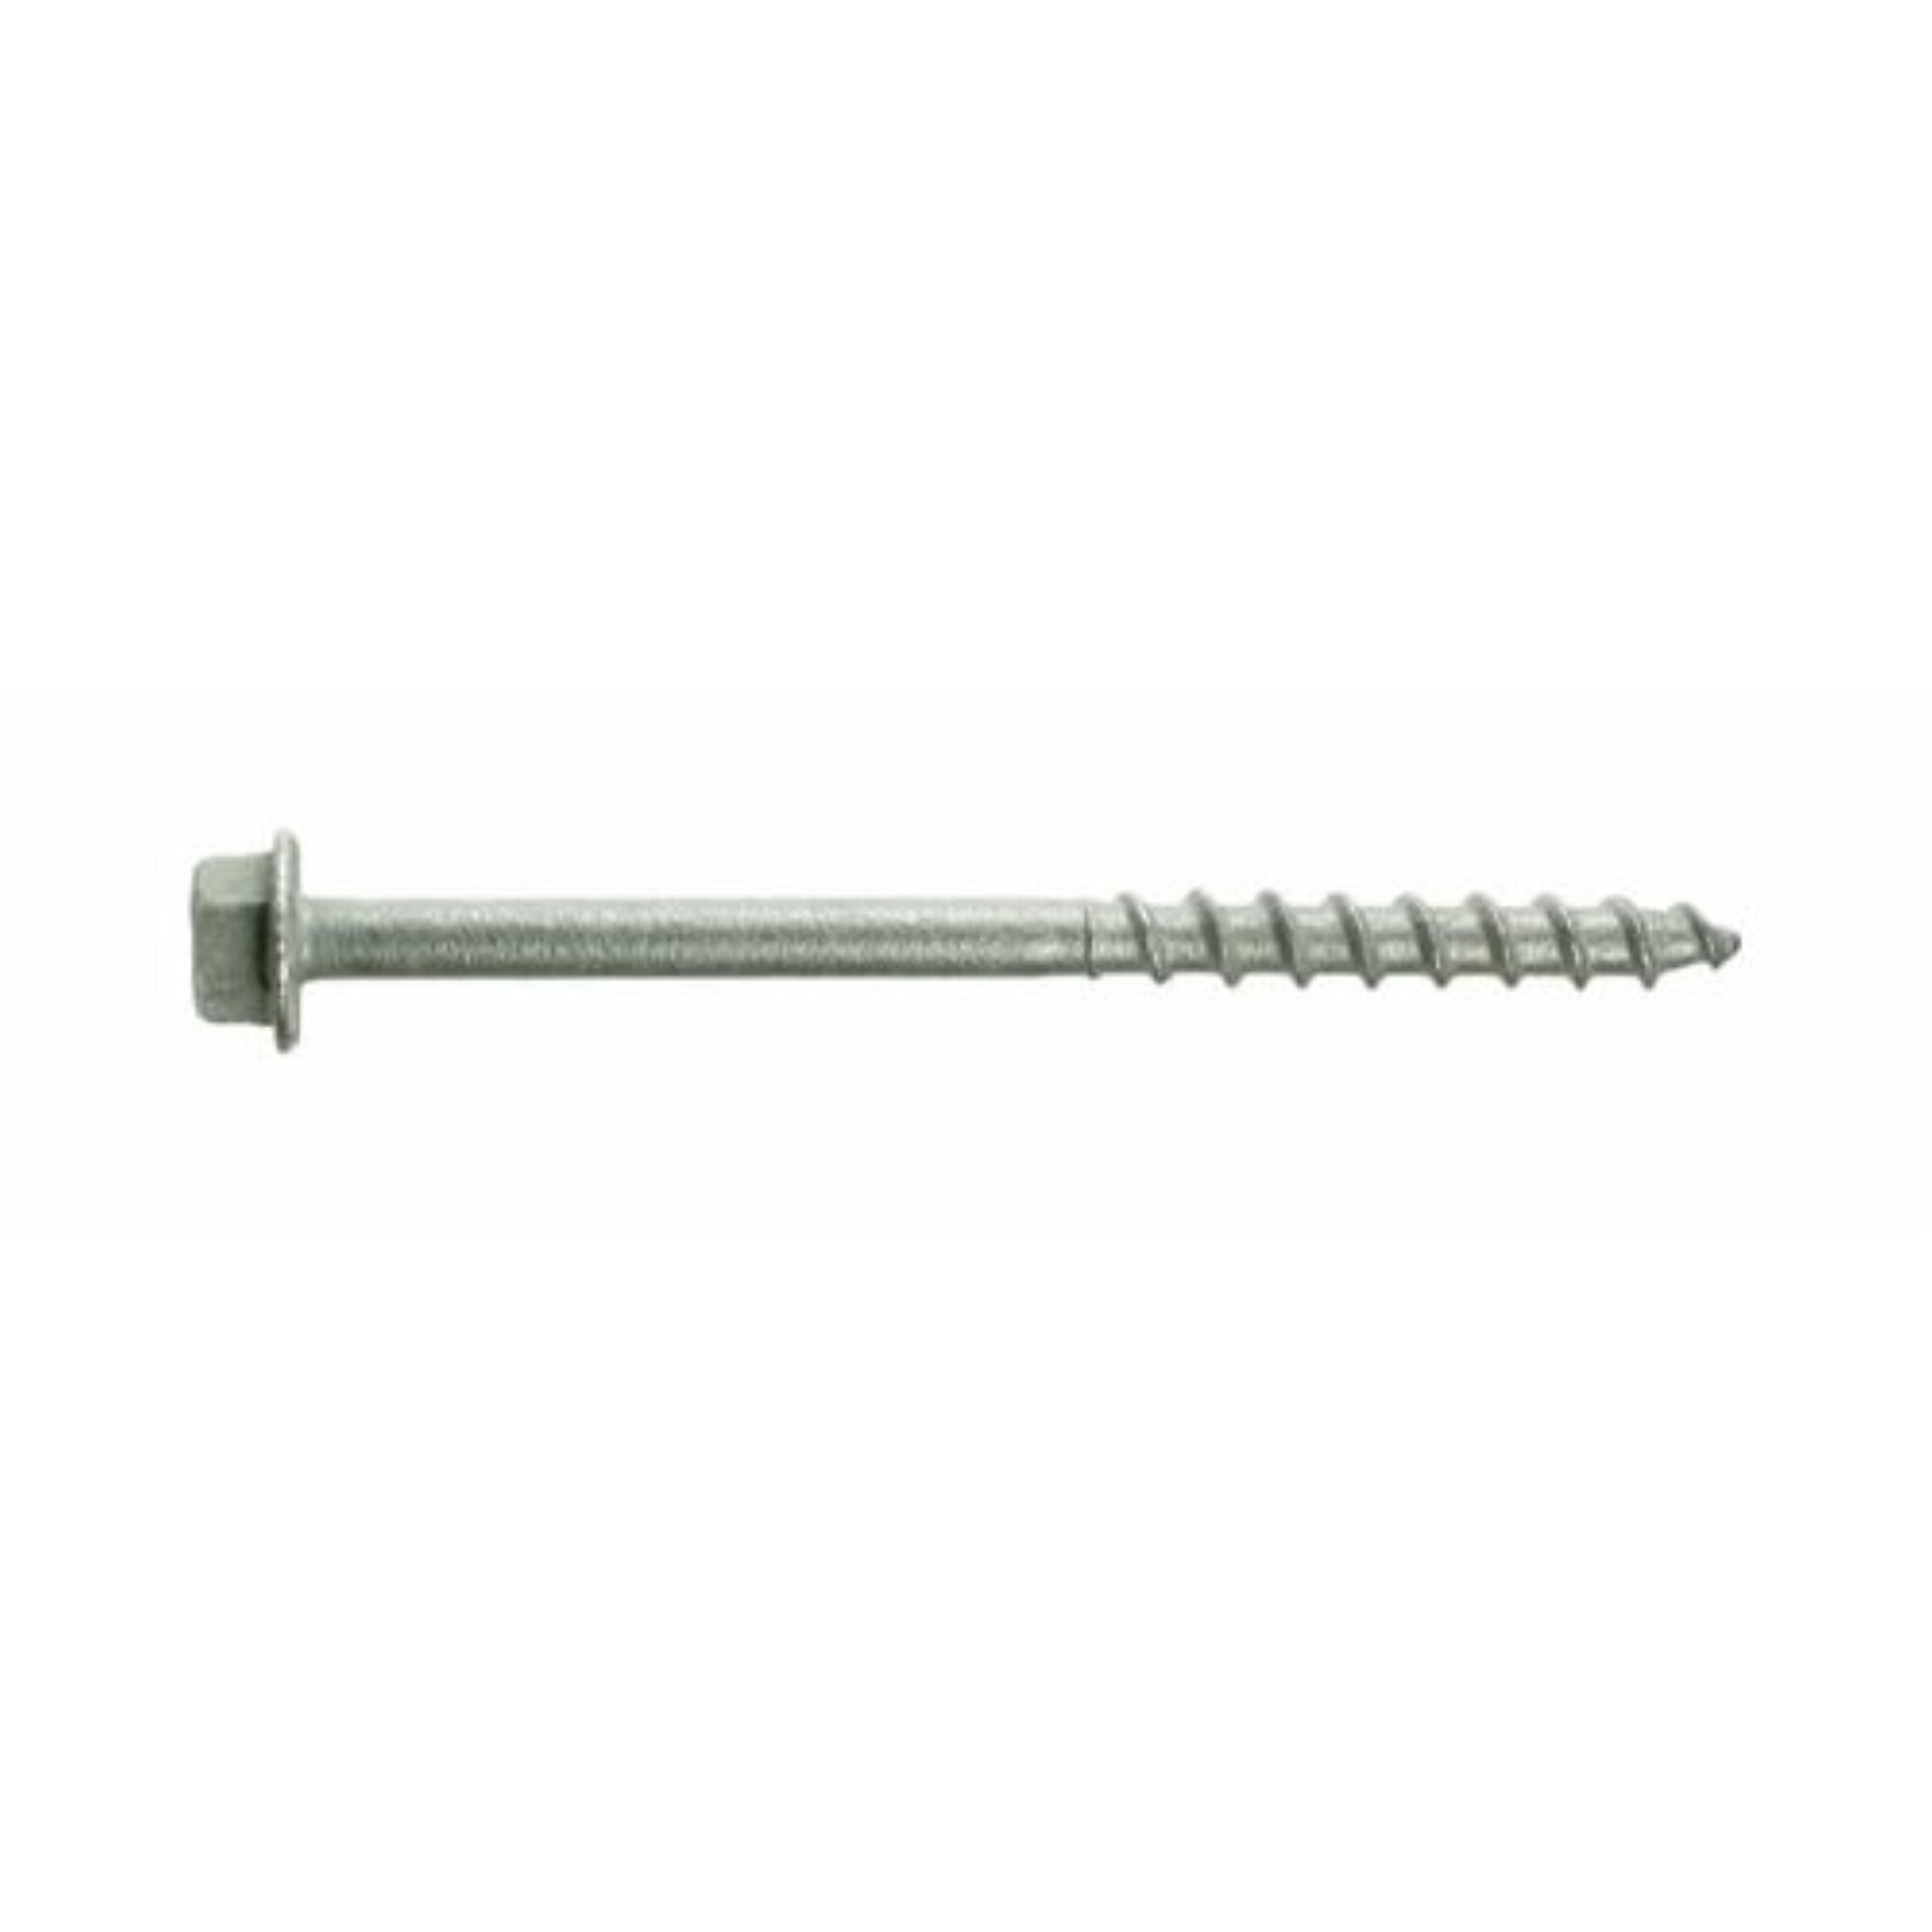 Simpson, Strong-Tie #10 x 2-1/2Inch Struct. Screws, Included (qty.) 500, Model SD10212R500